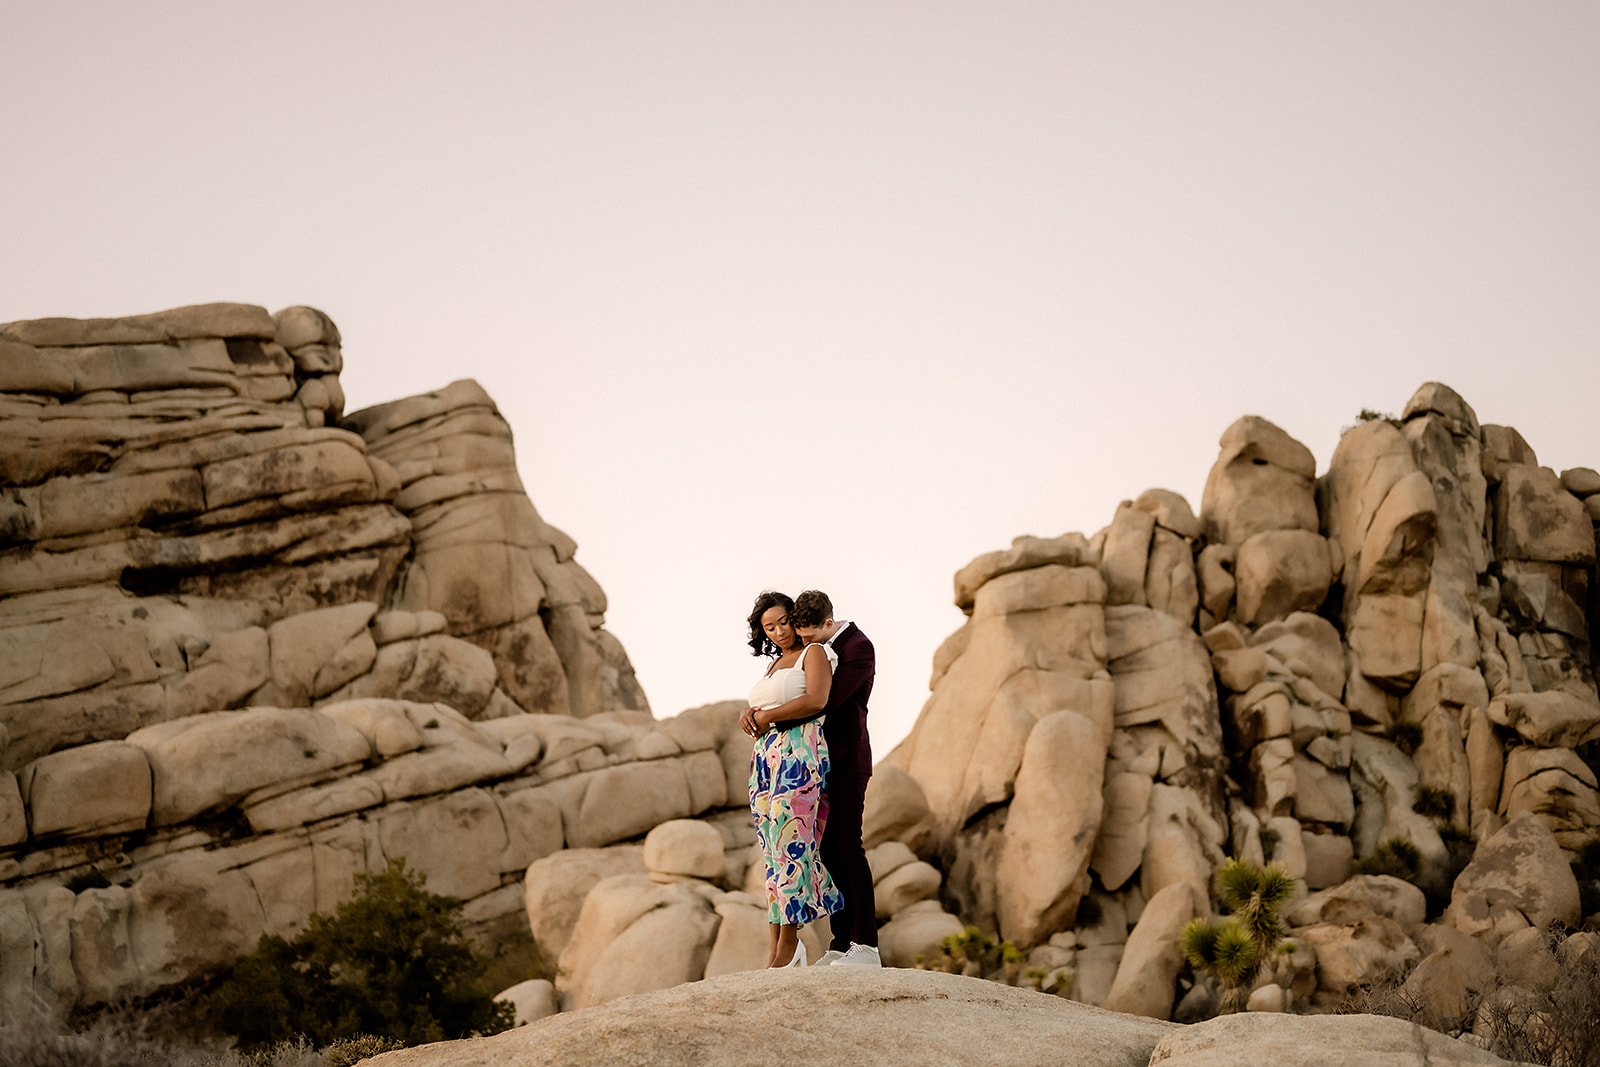 Engagement Session in Joshua Tree National Park. Wedding and Elopement Photographer for Joshua Tree